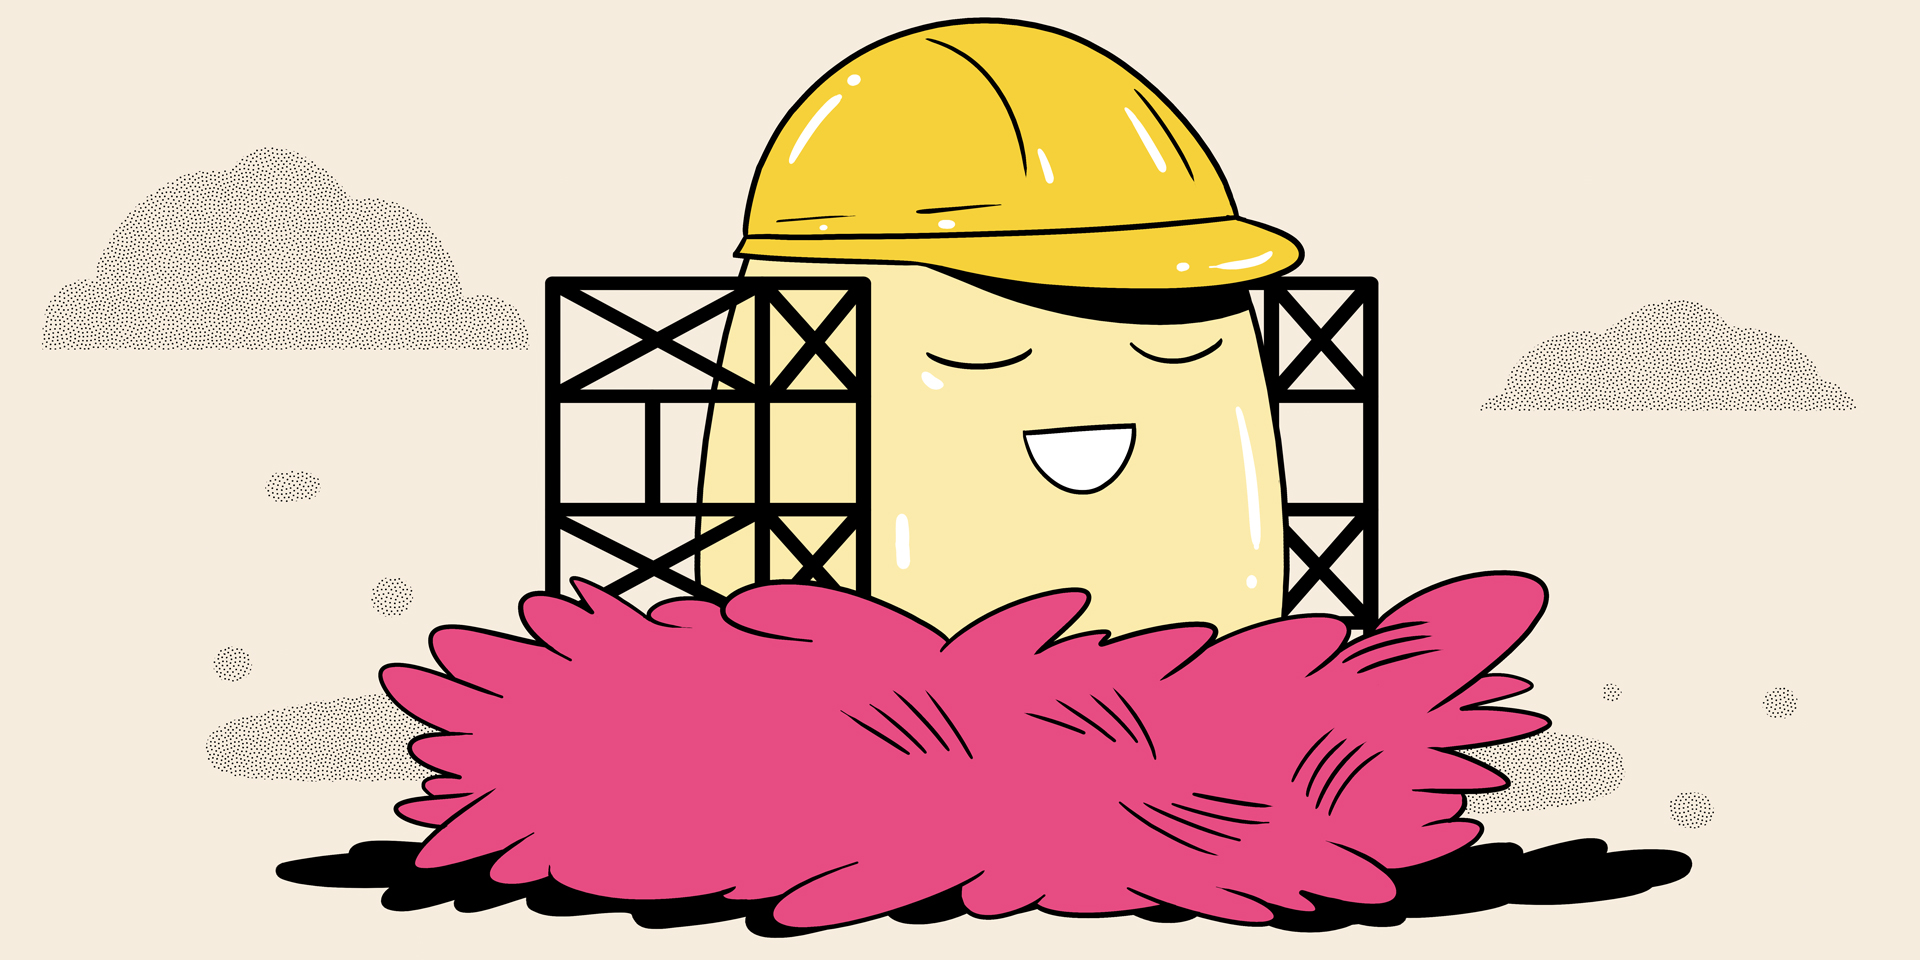 Nesting egg is surrounded by construction structure and construction hat.